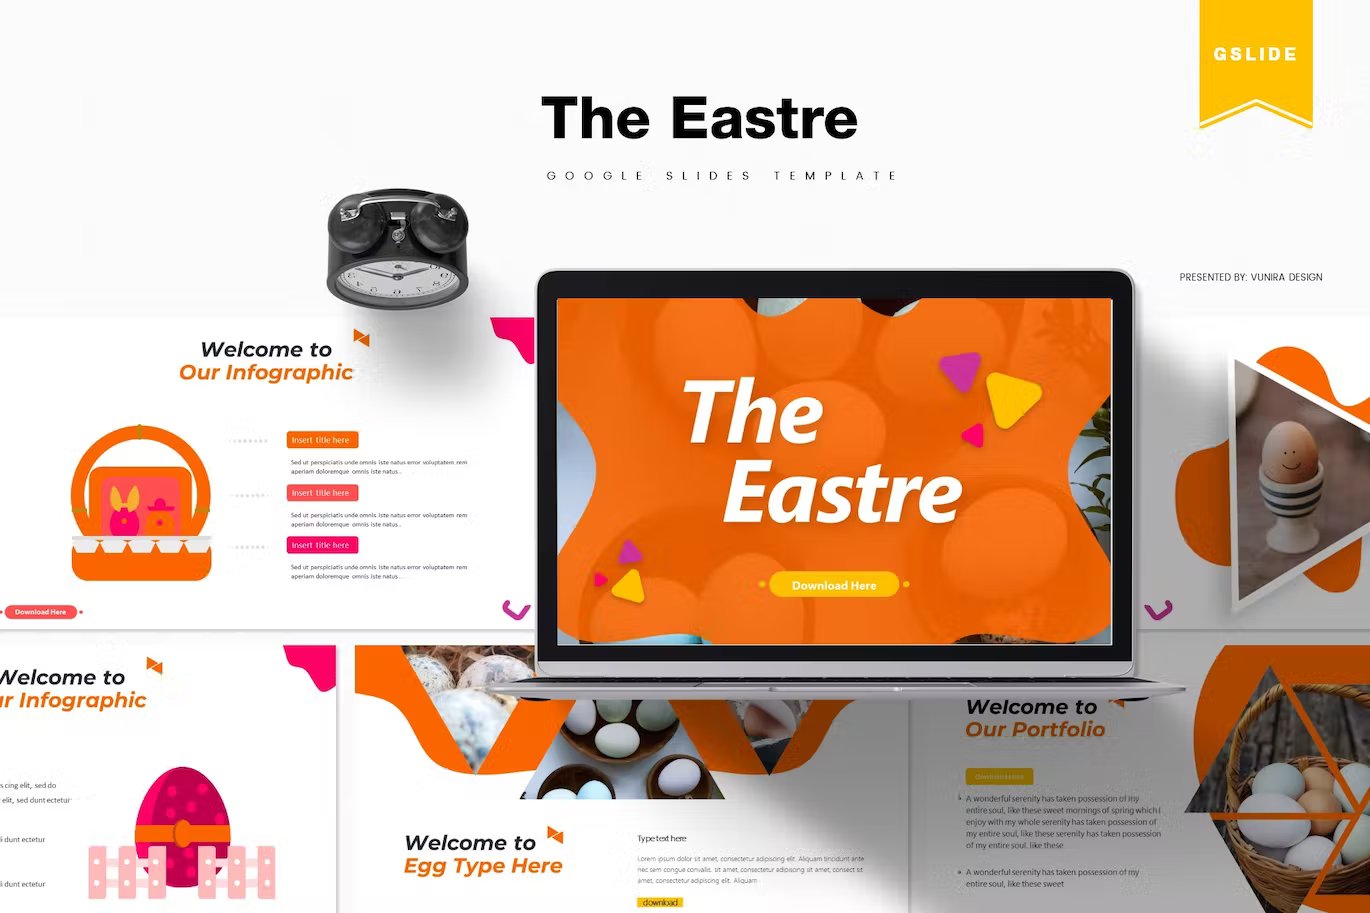 Black lettering "The Eastre Google Slides Template" and different the easter google slides templates in orange, white, dark gray, yellow and pink on a white background.